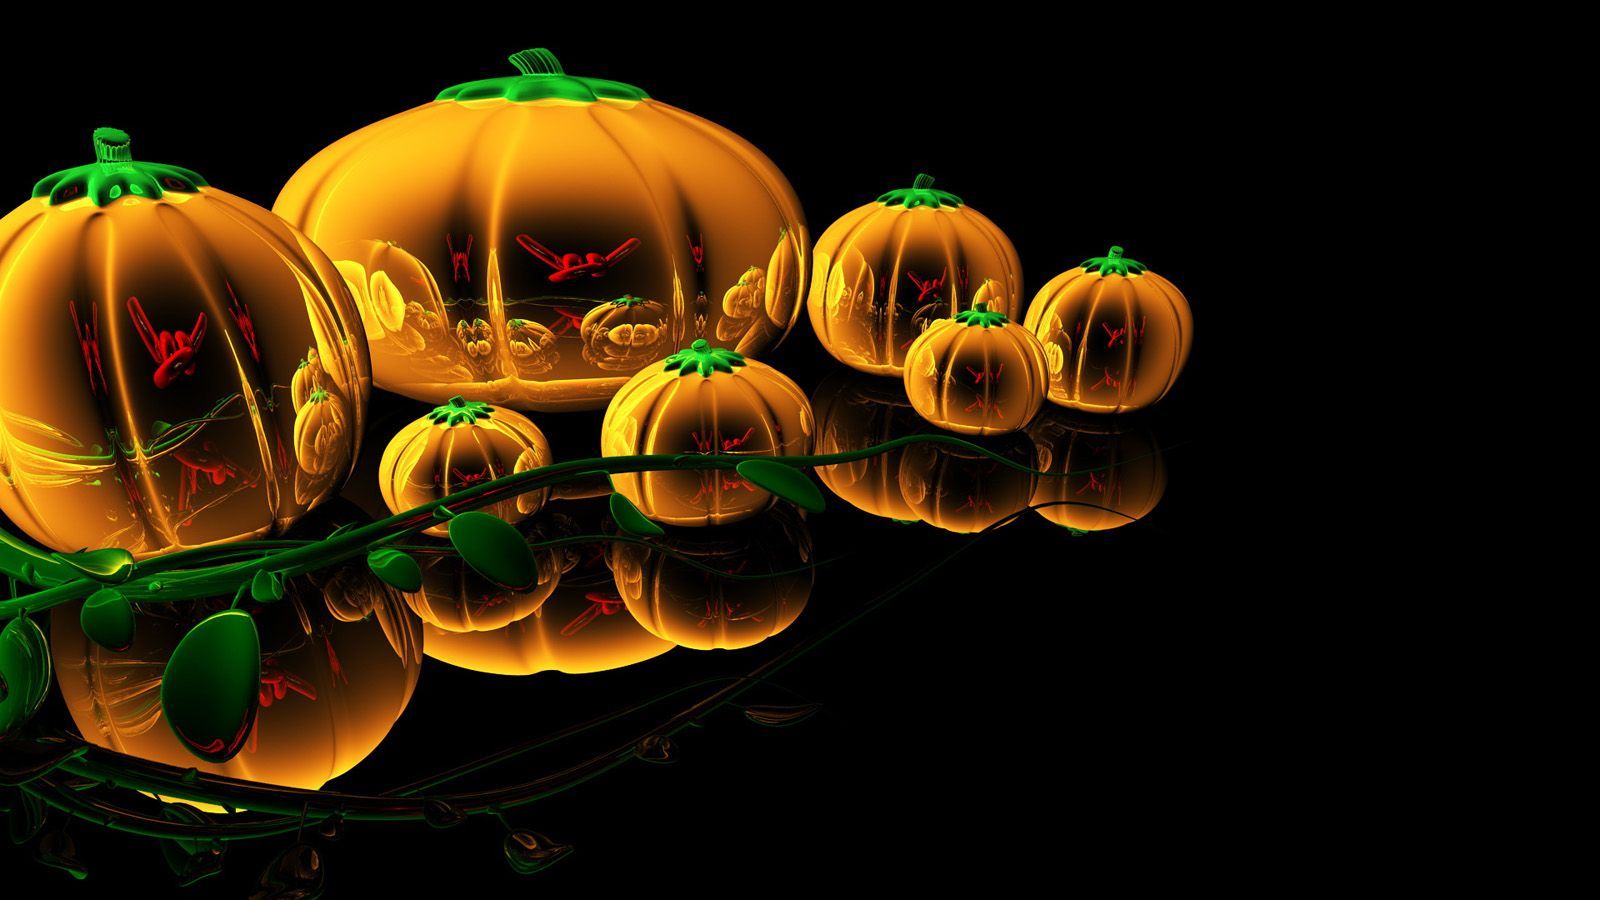 Image result for 1600x900 HD wallpaper halloween. Halloween wallpaper, Halloween image, Halloween jack o lanterns